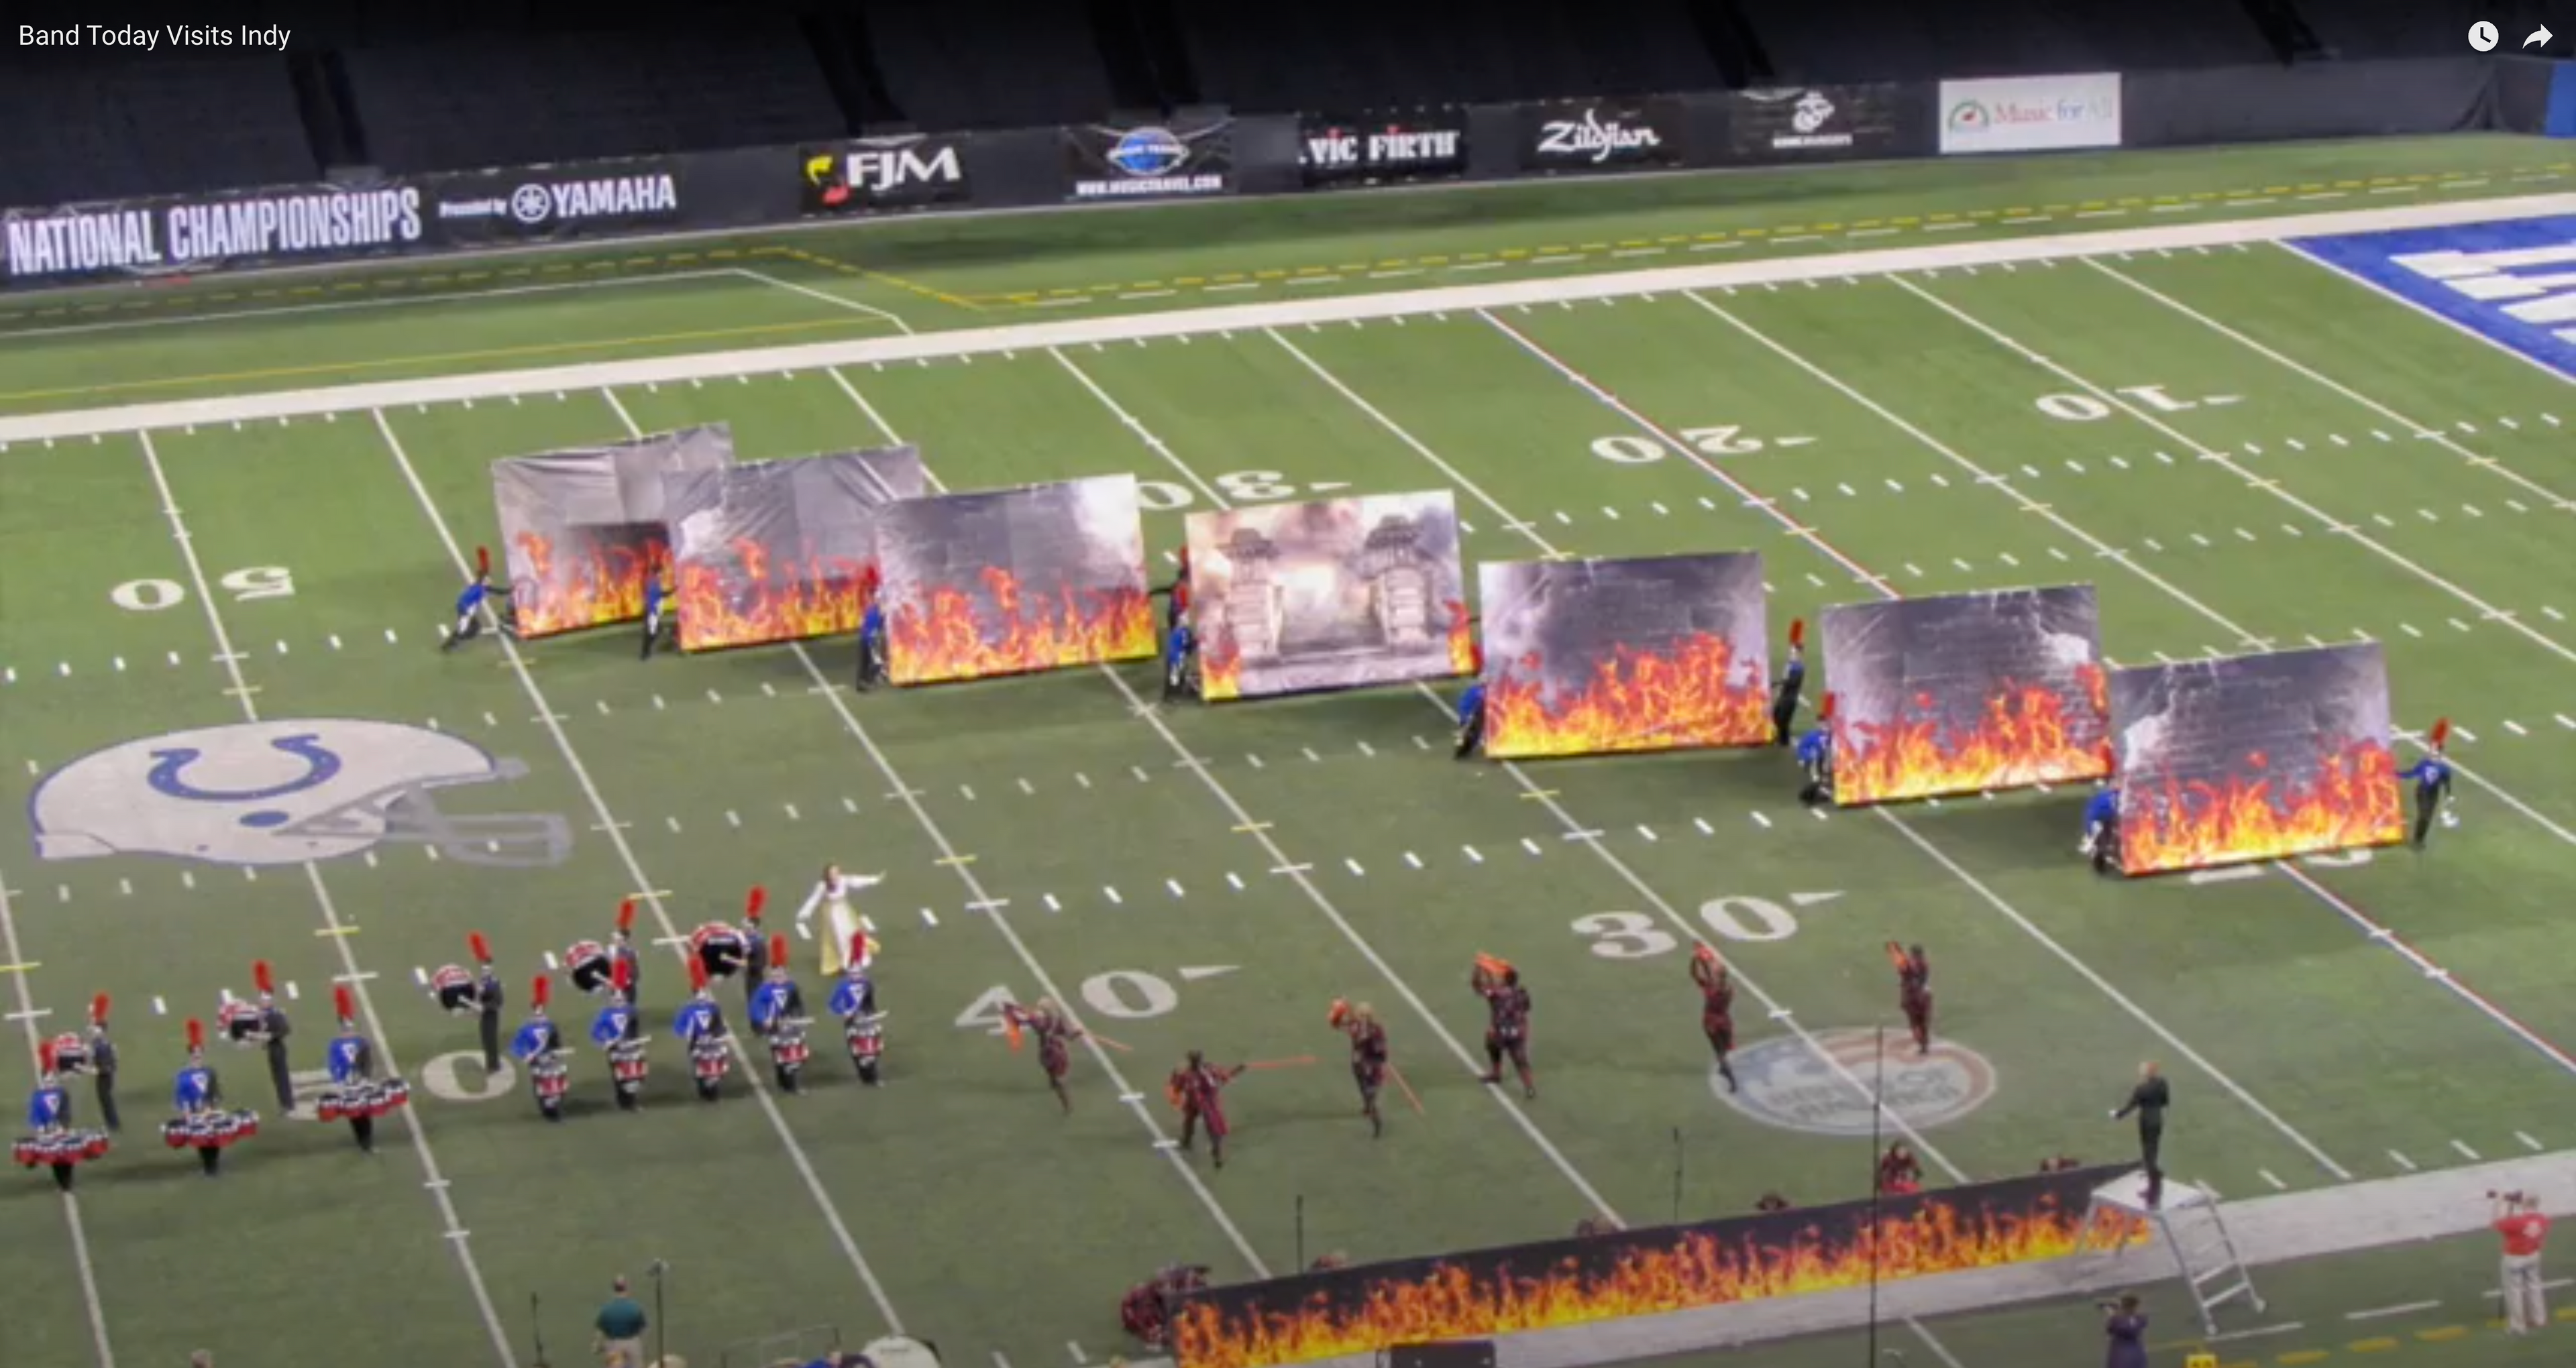 Load video: Band Today Visits Indy